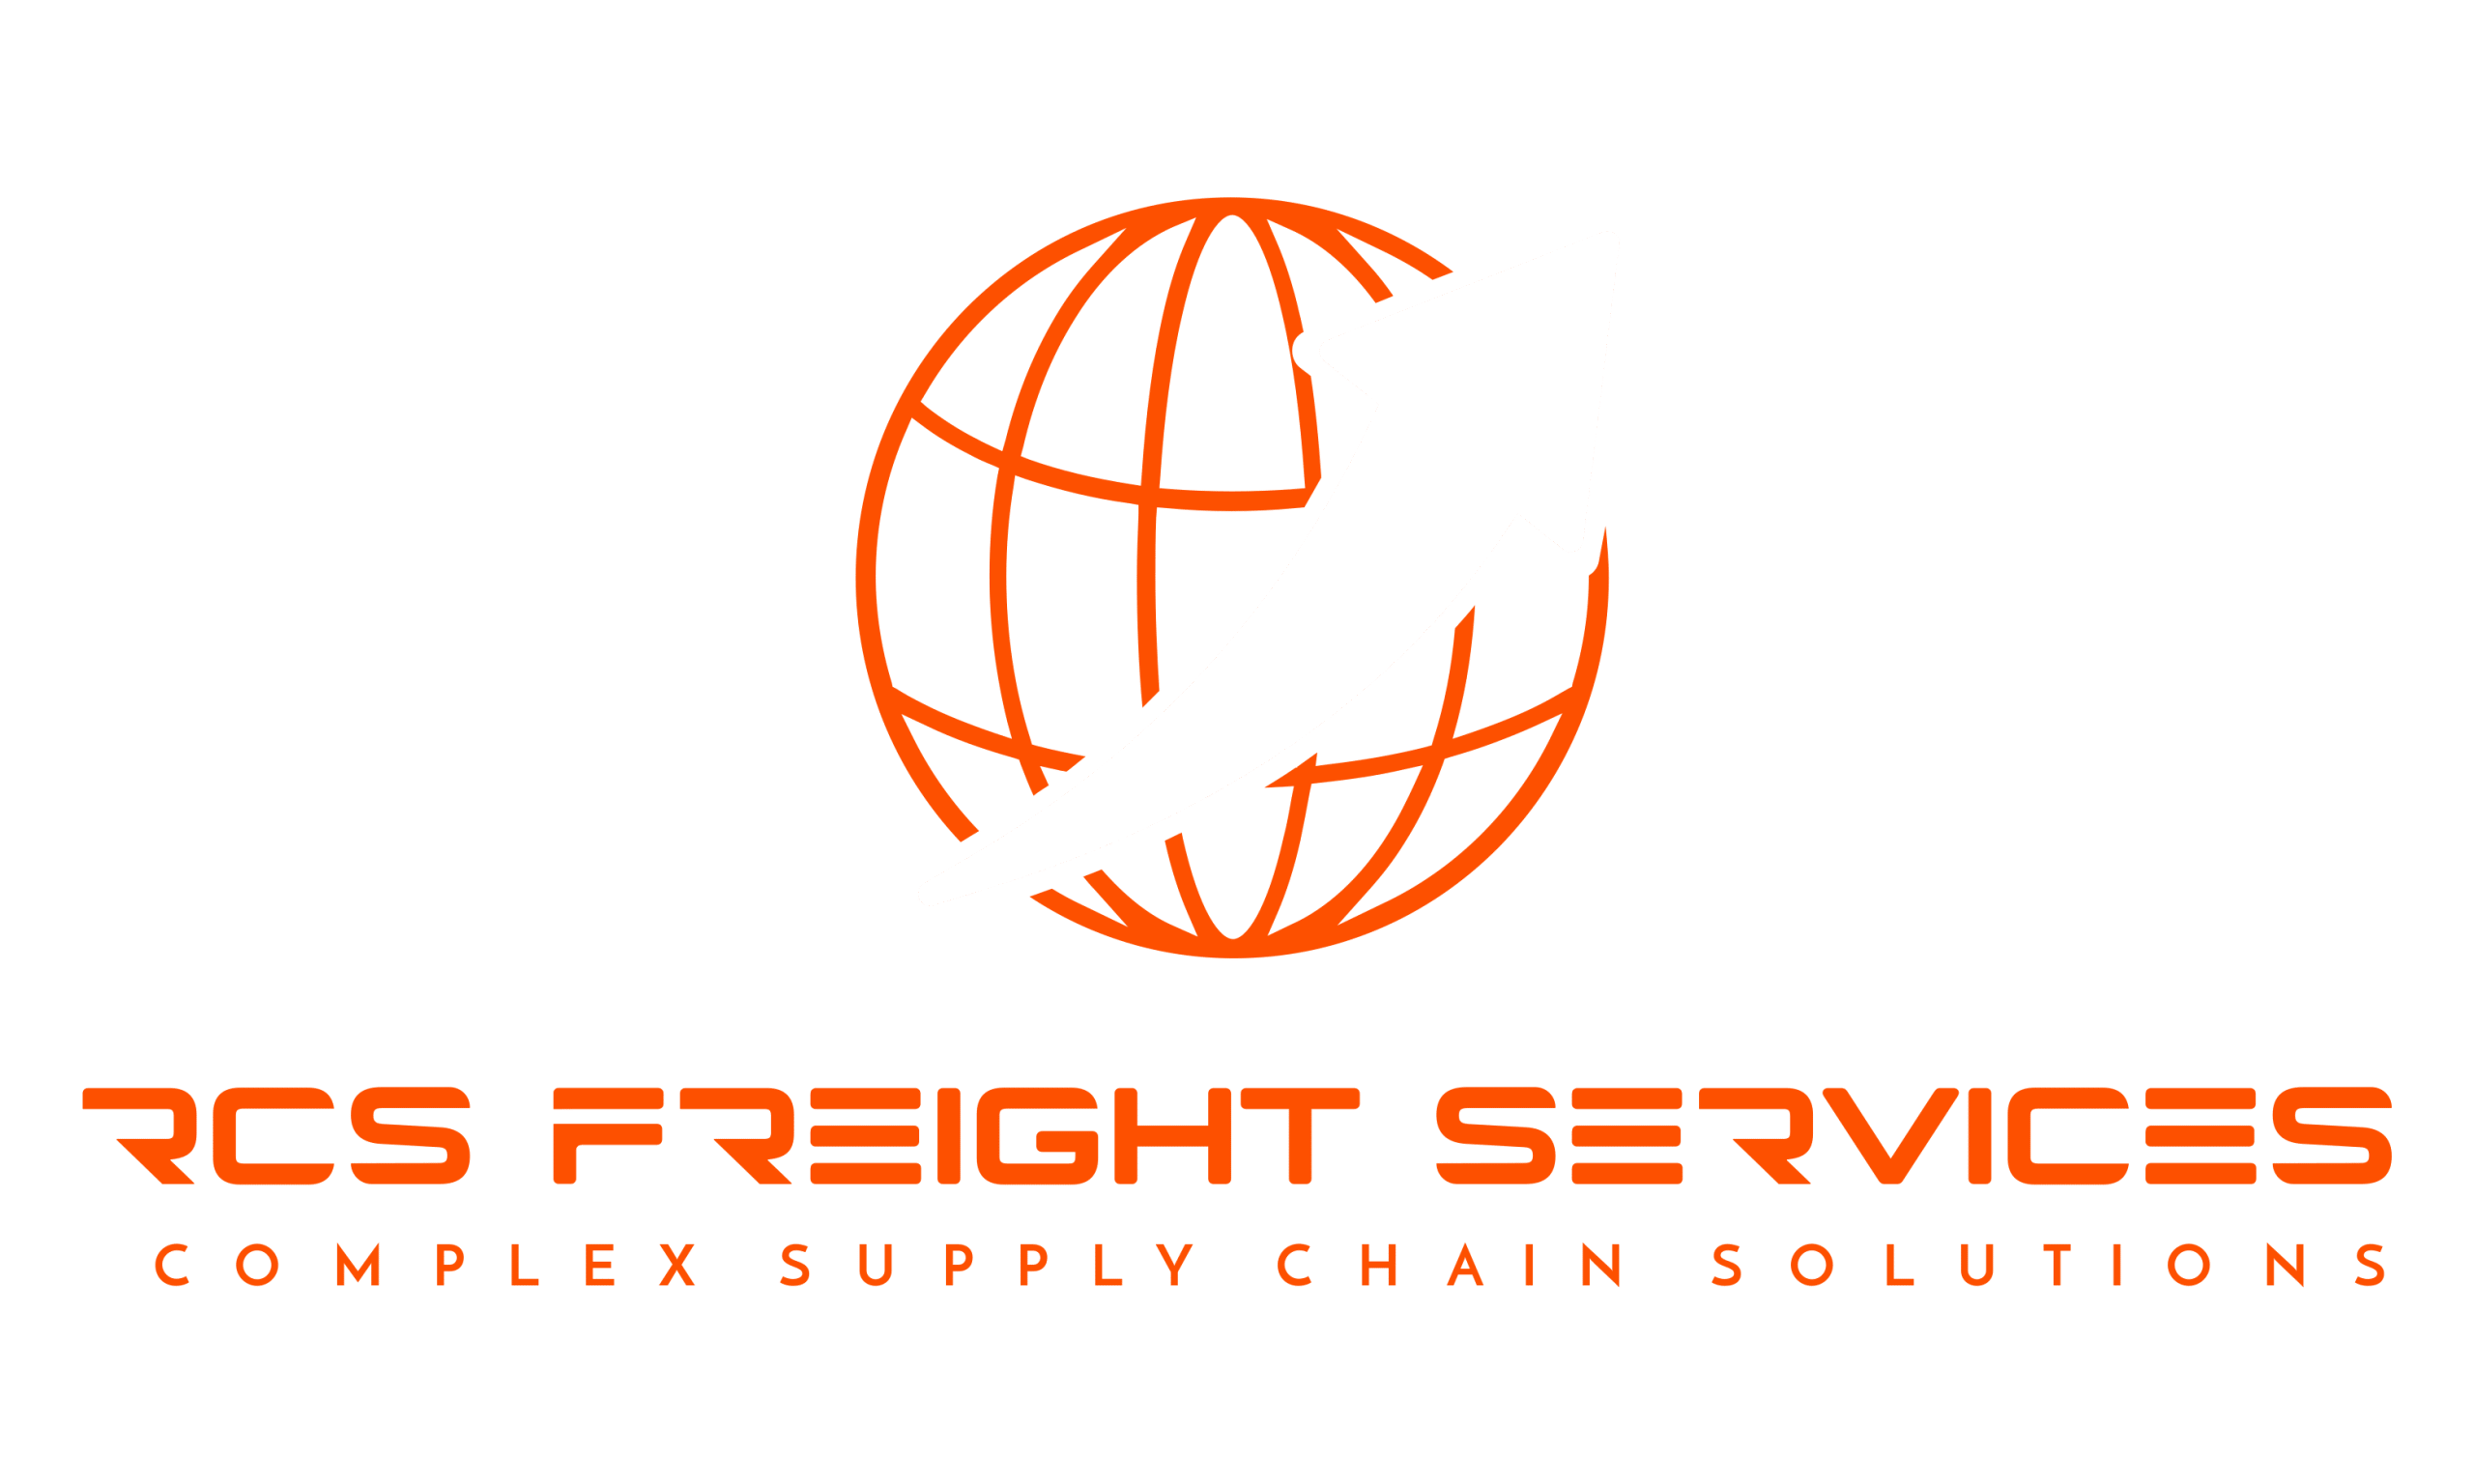 RCS Freight Services